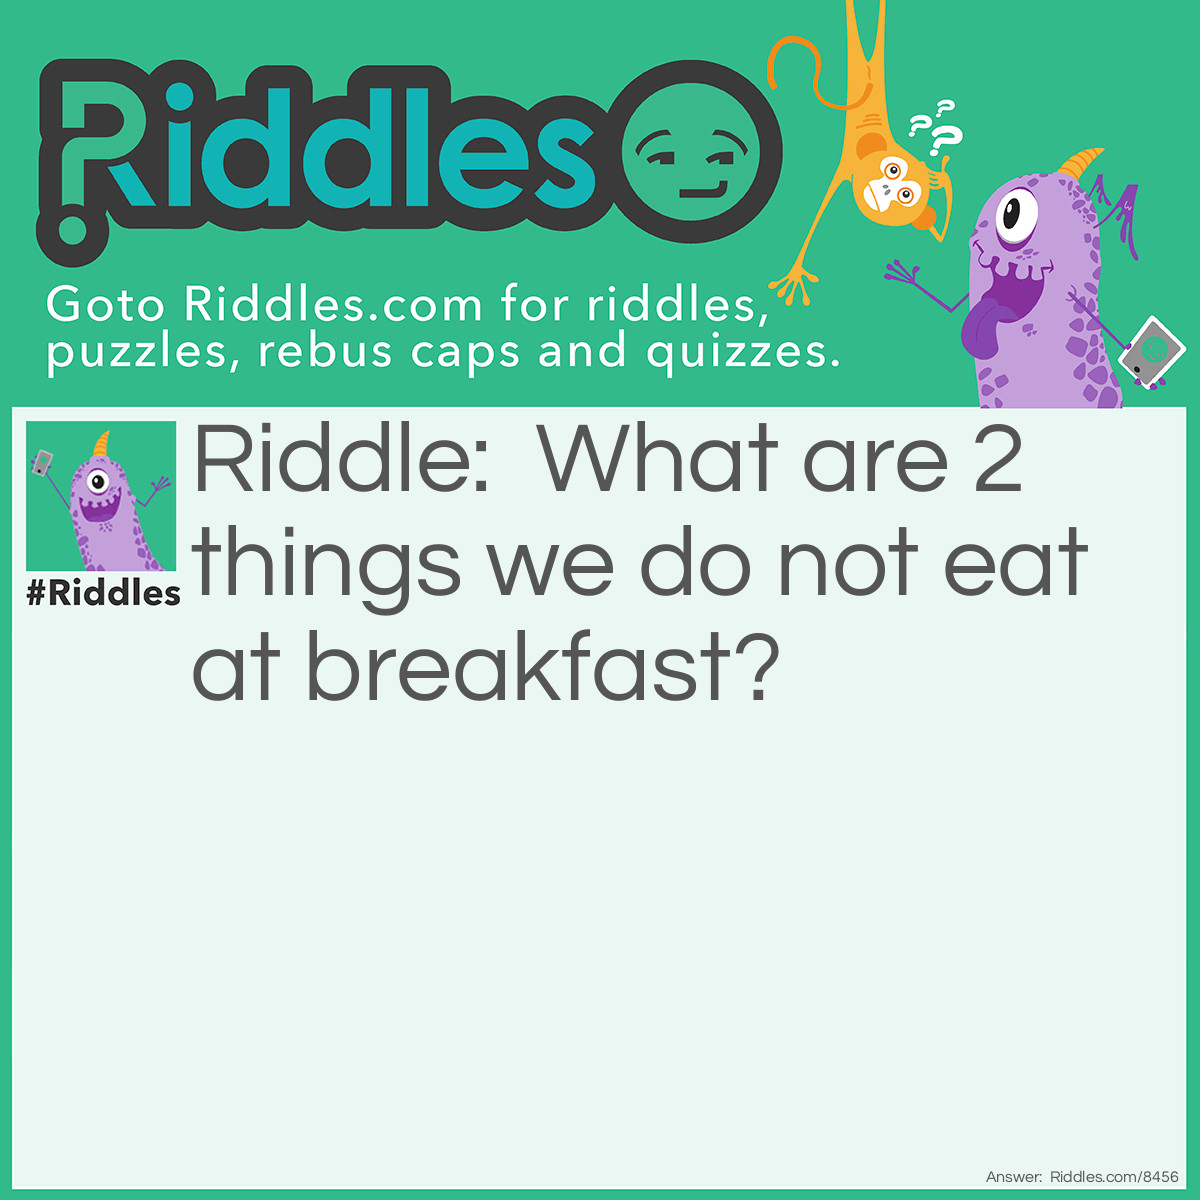 Riddle: What are 2 things we do not eat at breakfast? Answer: Dinner and lunch